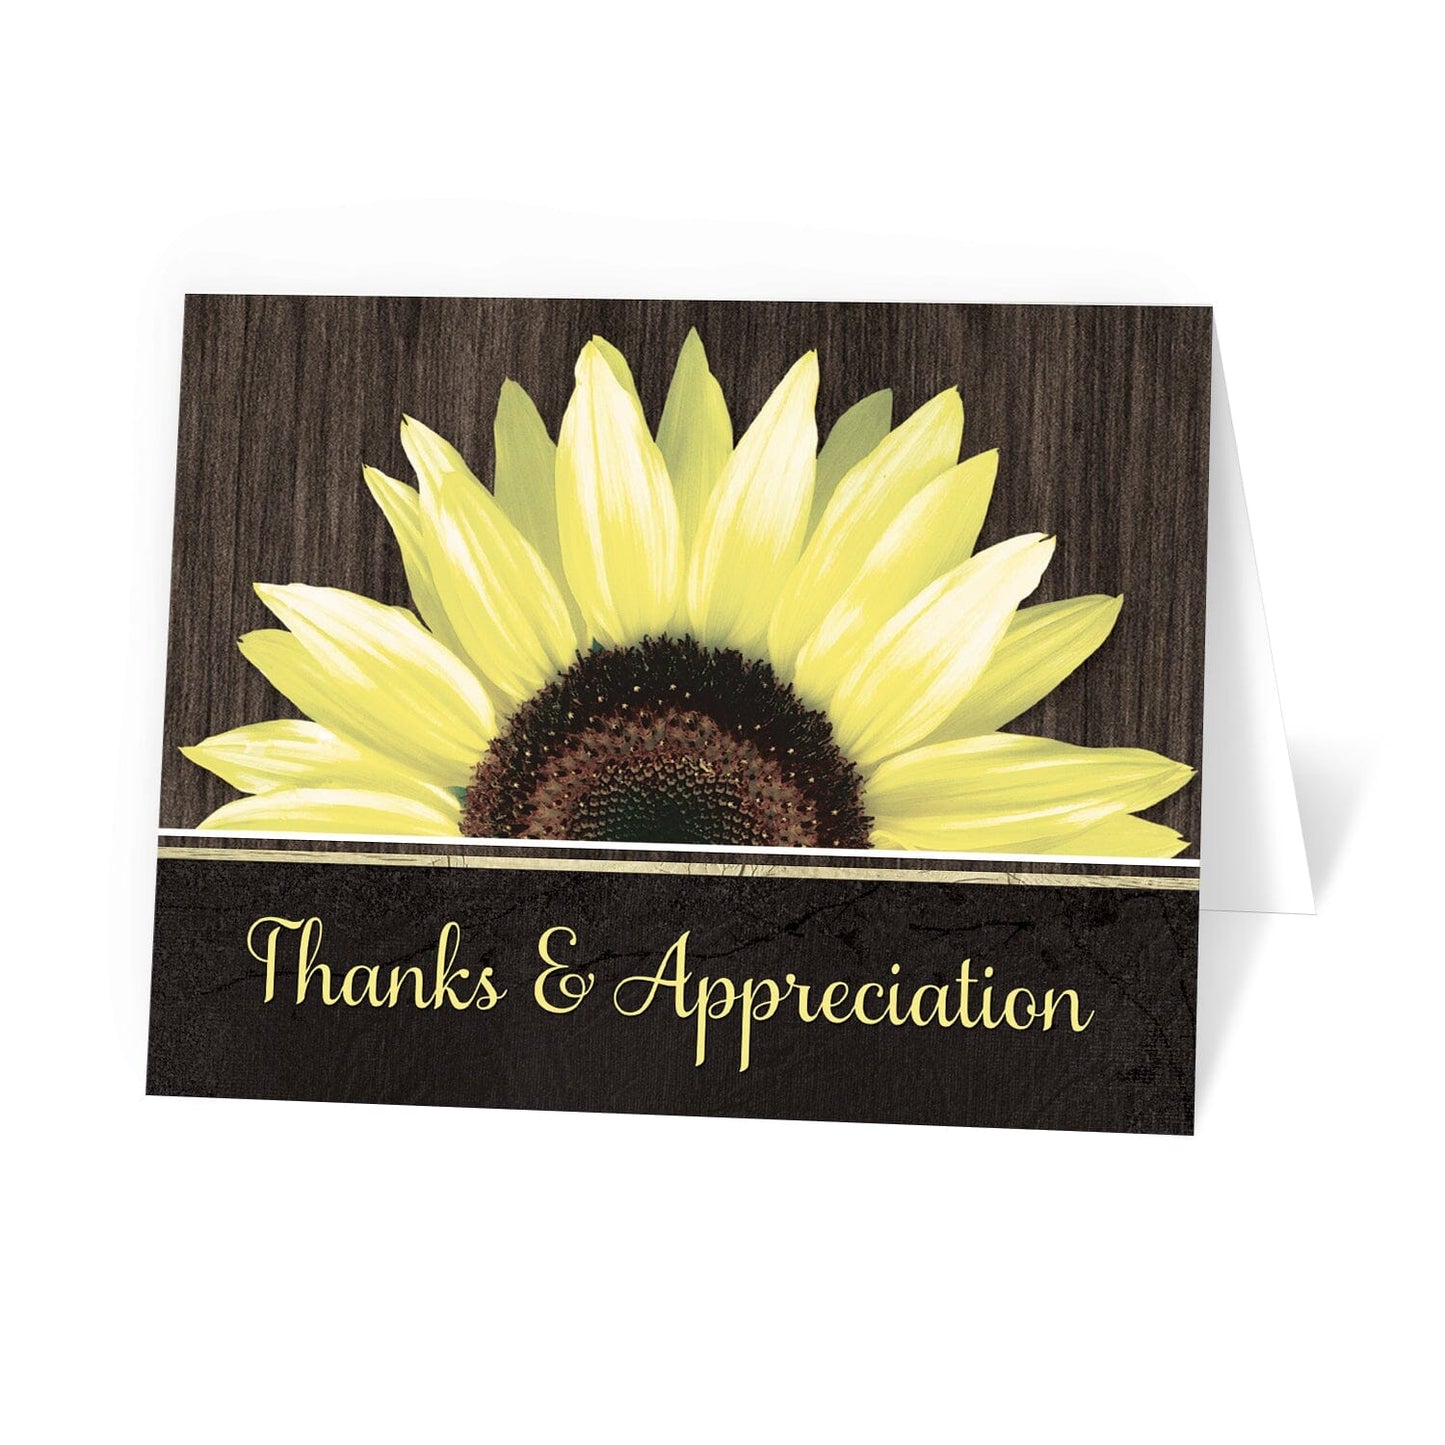 Rustic Sunflower Black Thank You Cards at Artistically Invited.